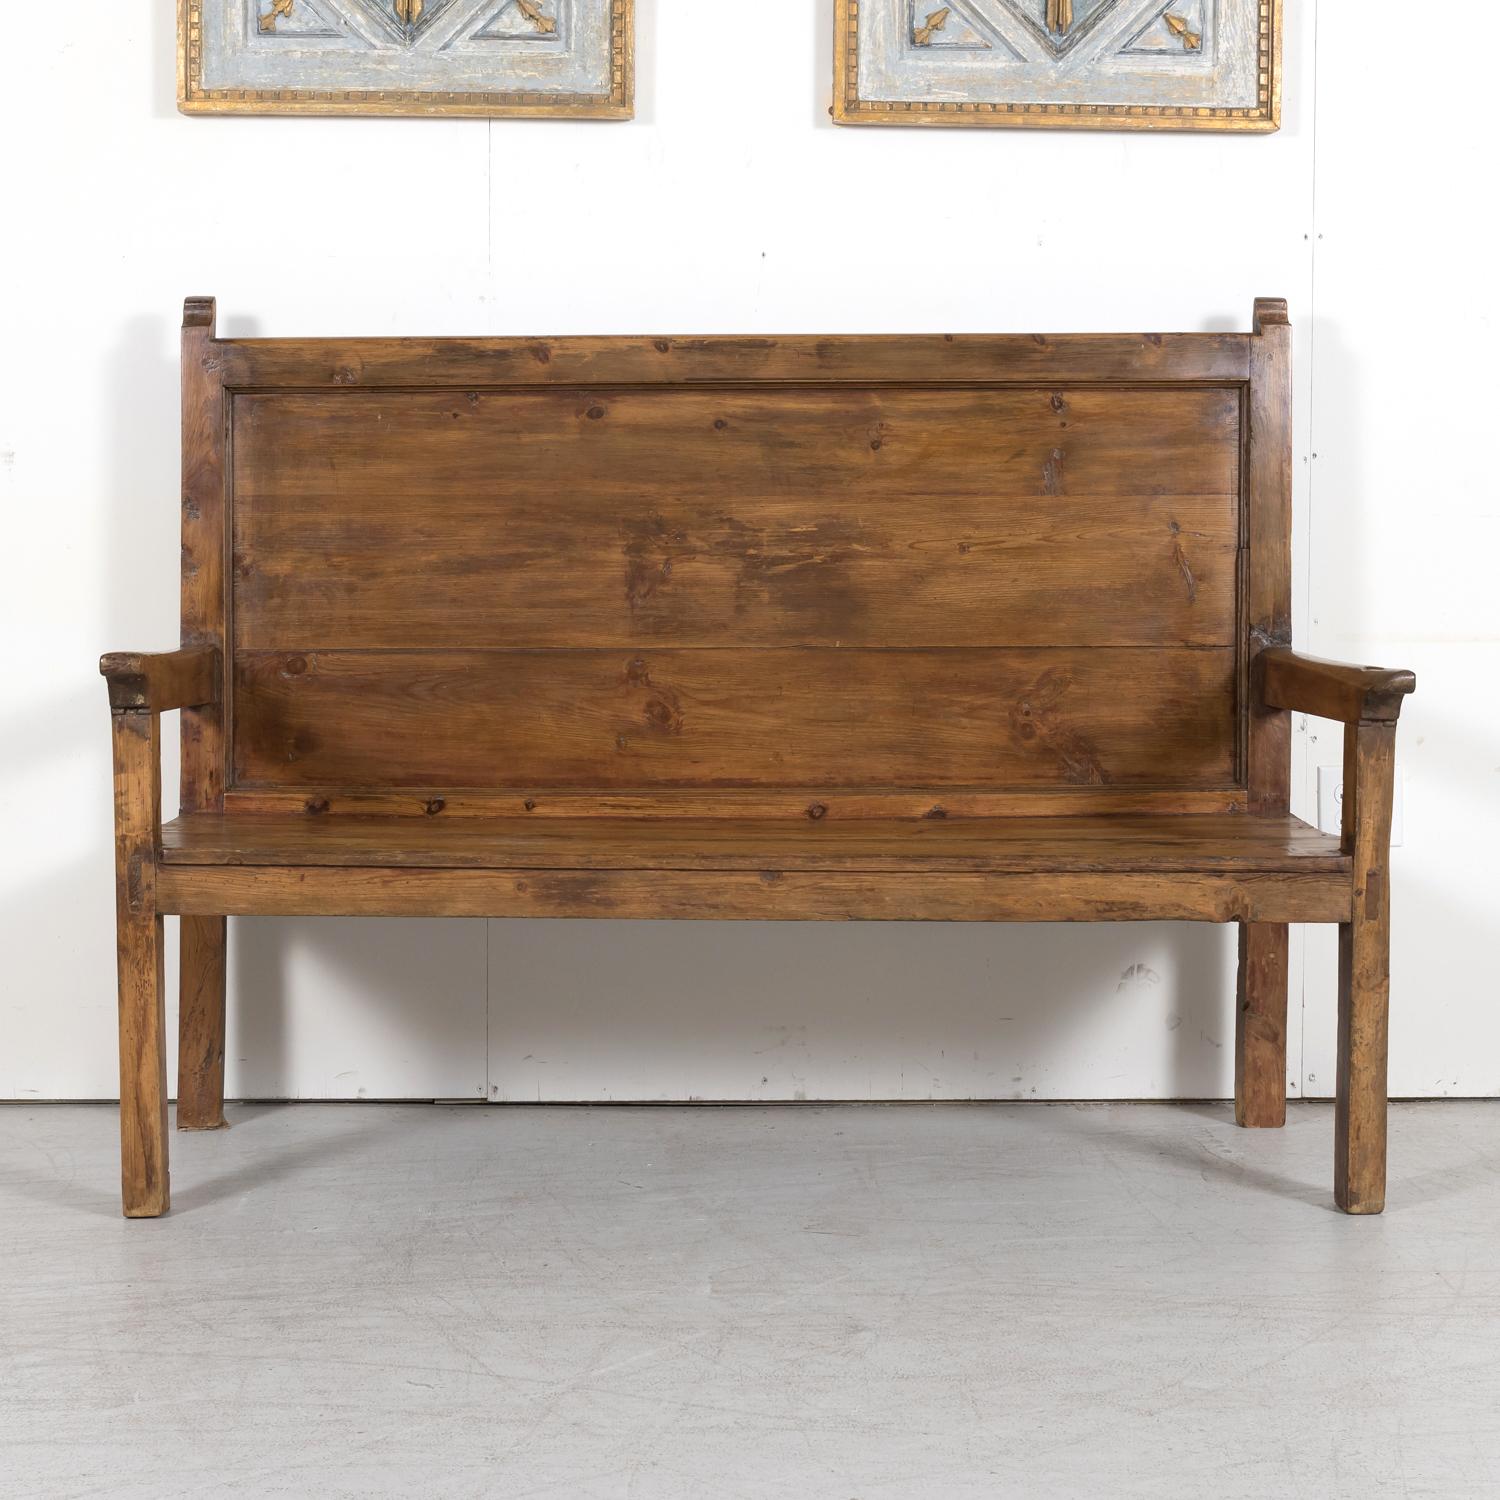 19th Century rustic Spanish Colonial hall bench handcrafted in the Catalan region of solid pine, having a high back with sculptural posts and plank seat raised on square legs, circa 1880s. This handsome bench has aged and weathered to a beautiful